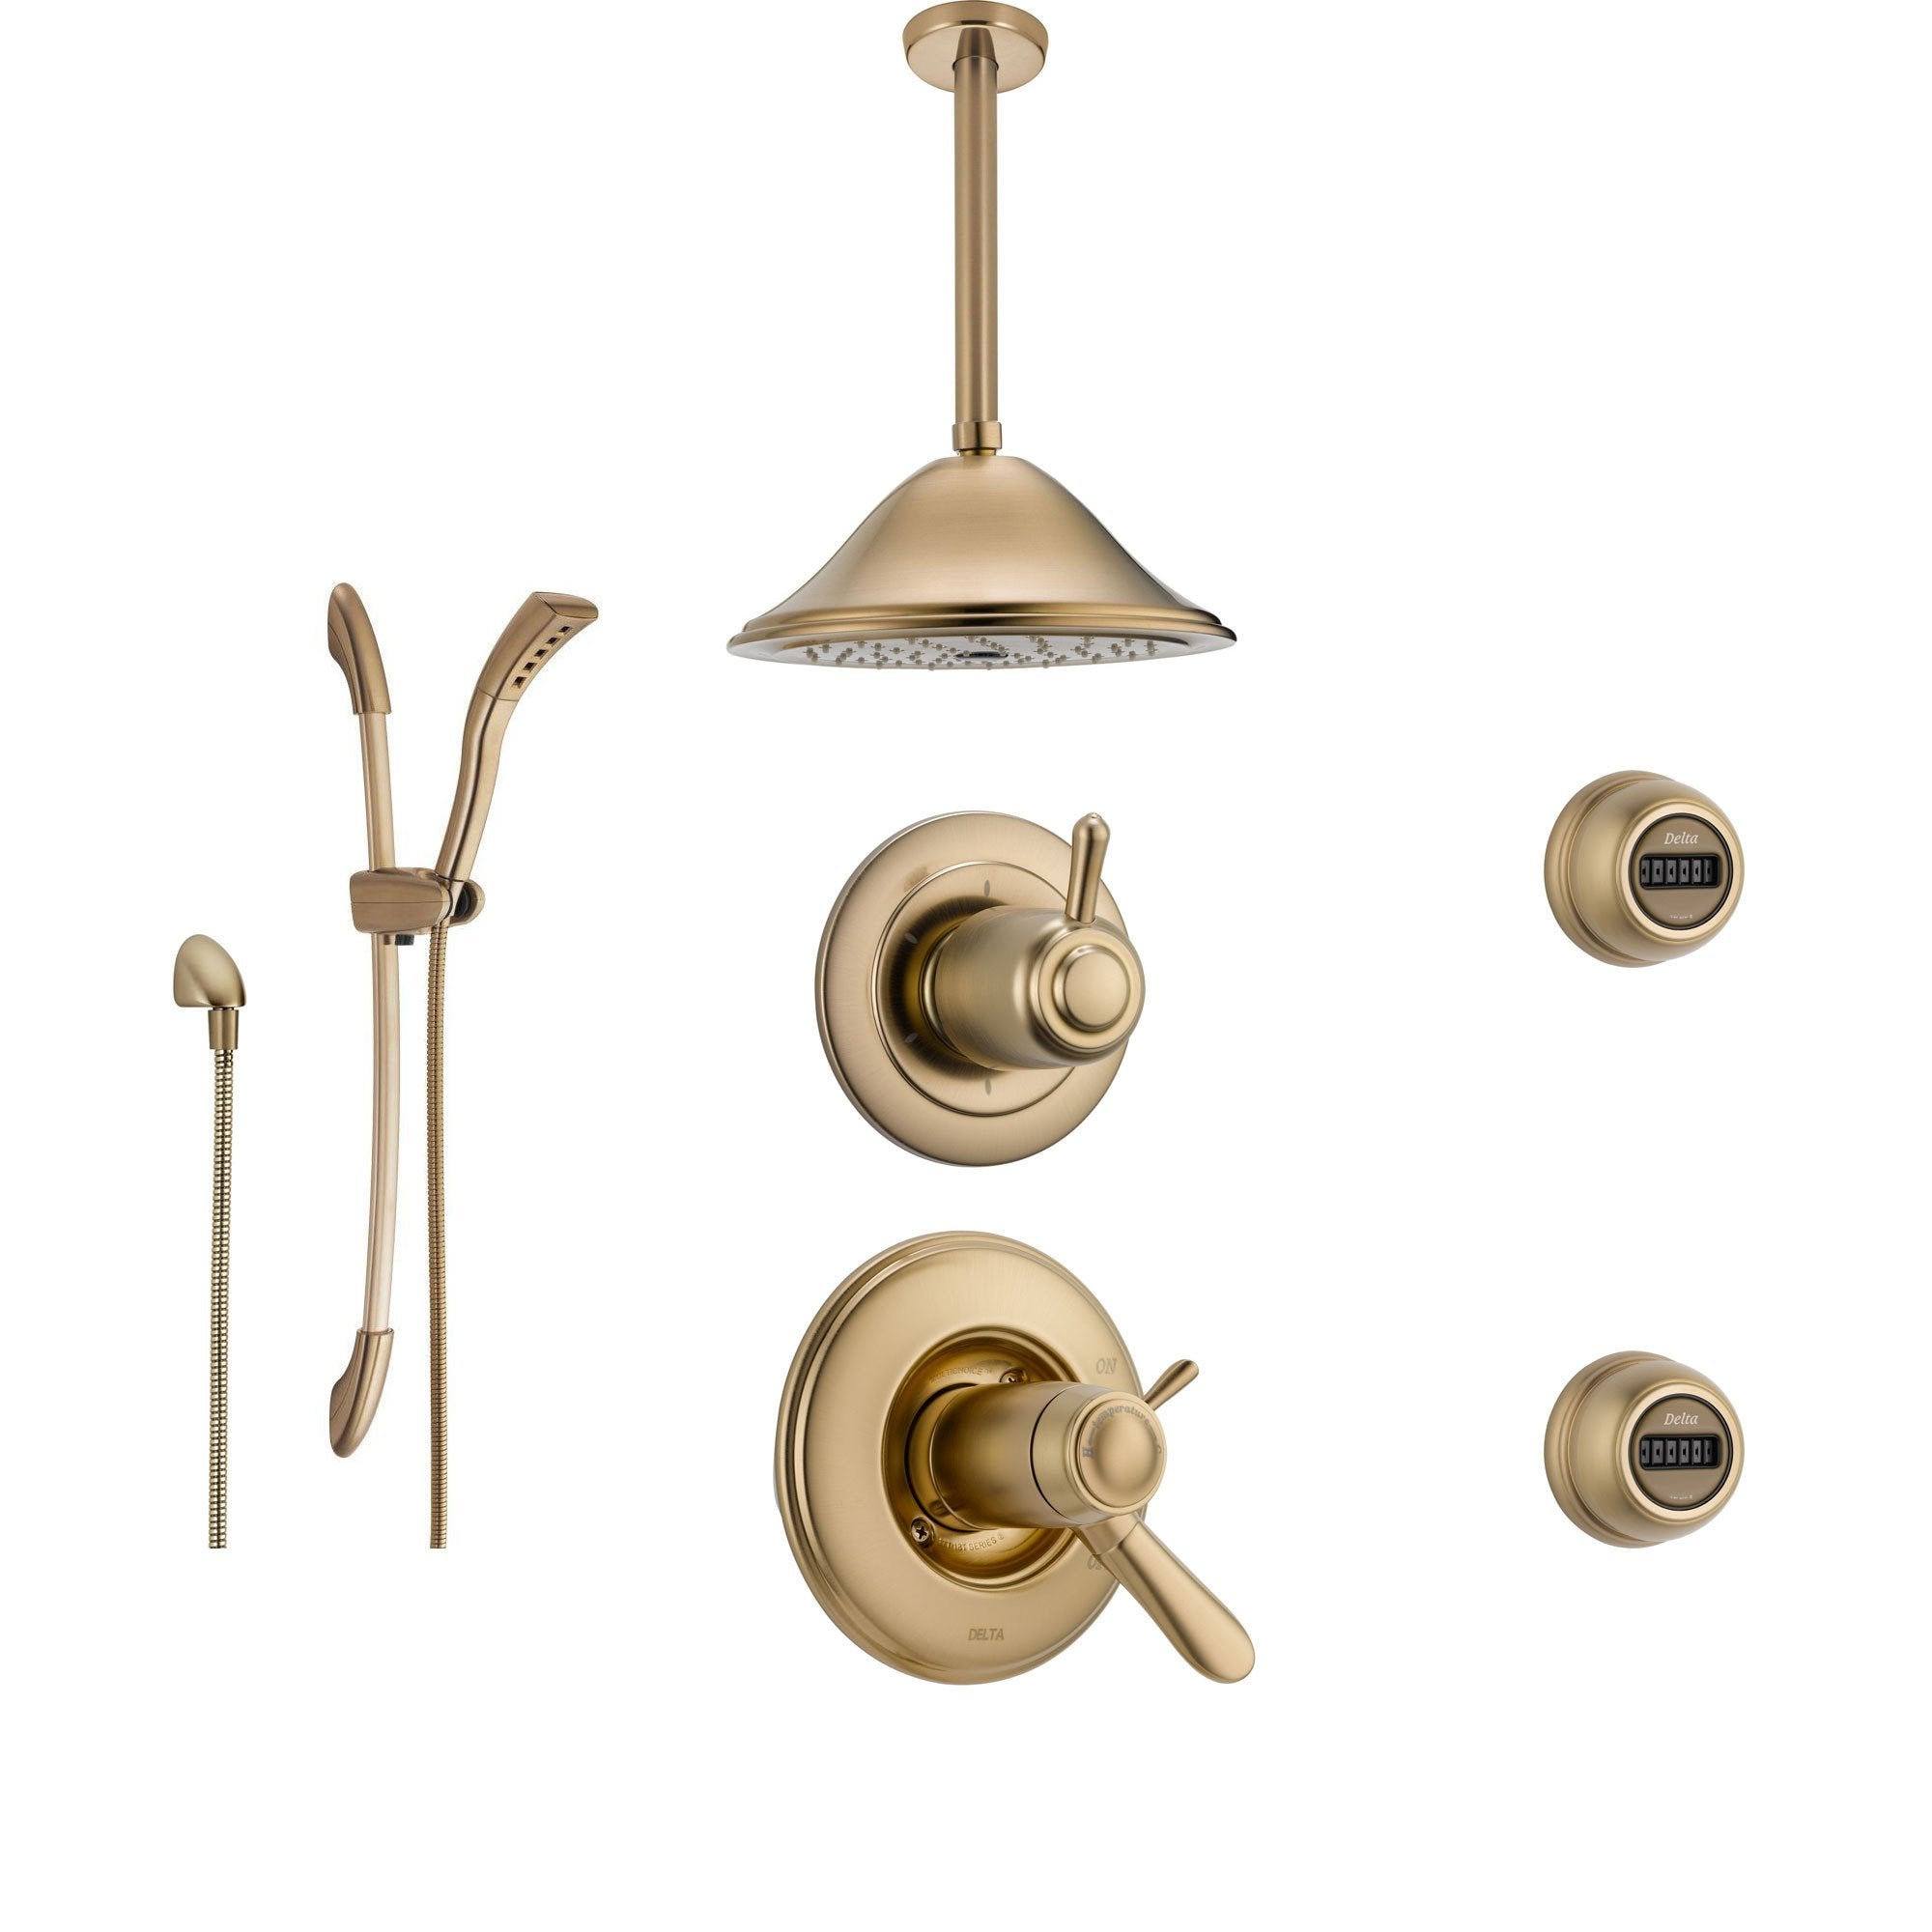 Delta Lahara Champagne Bronze Shower System with Thermostatic Shower Handle, 6-setting Diverter, Ceiling Mount Shower Head, Hand Shower, and 2 Body Sprays SS17T3892CZ